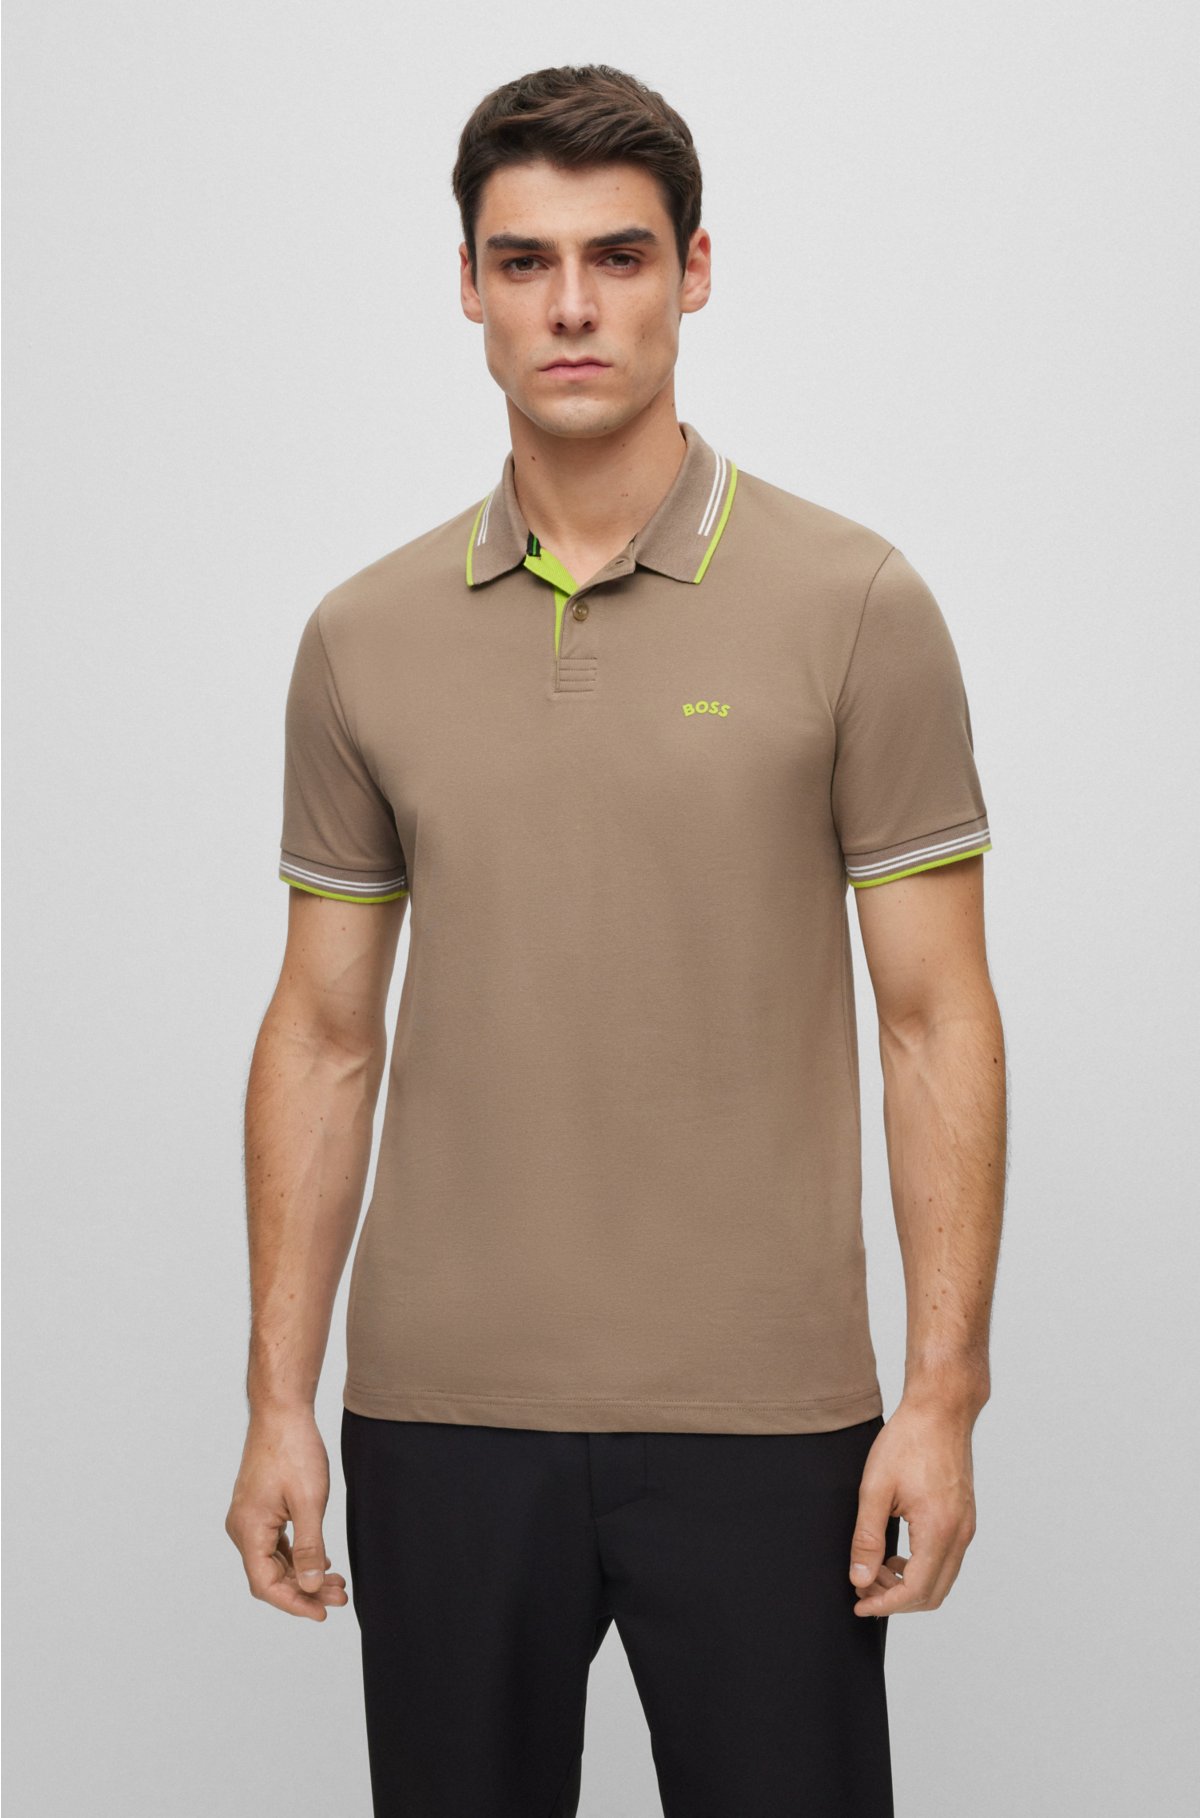 undercollar Stretch-cotton slim-fit shirt polo - BOSS with branded